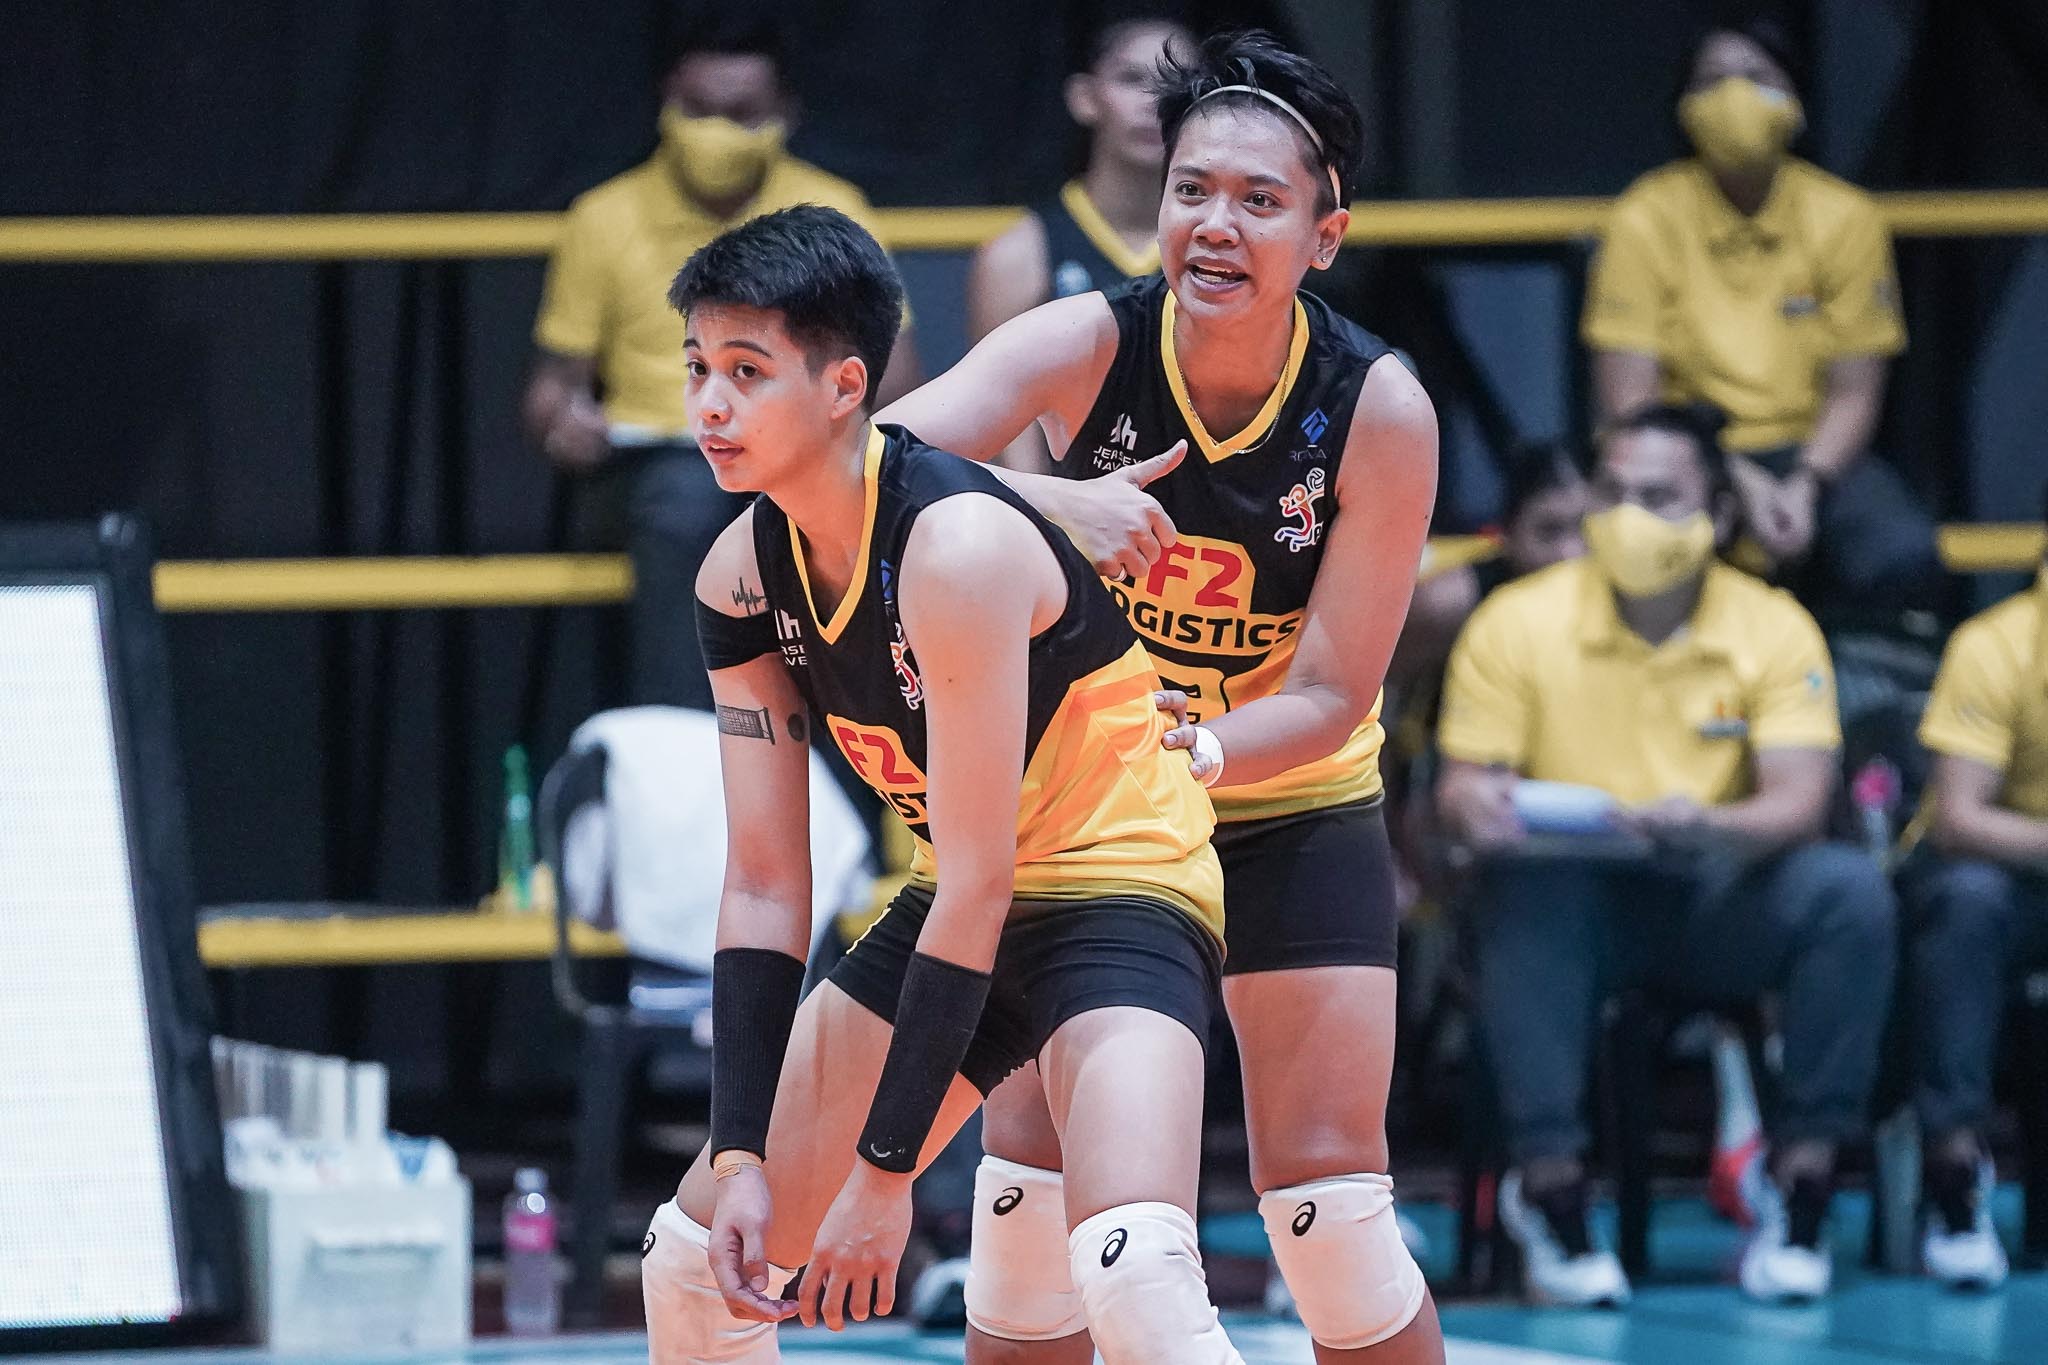 2022-PVL-F2-Logistics-vs-Chery-Tiggo-Ara-Galang-and-Kim-Fajardo DLSU staff not being able to join F2 led to withdrawal from PVL Invitational News PVL Volleyball  - philippine sports news